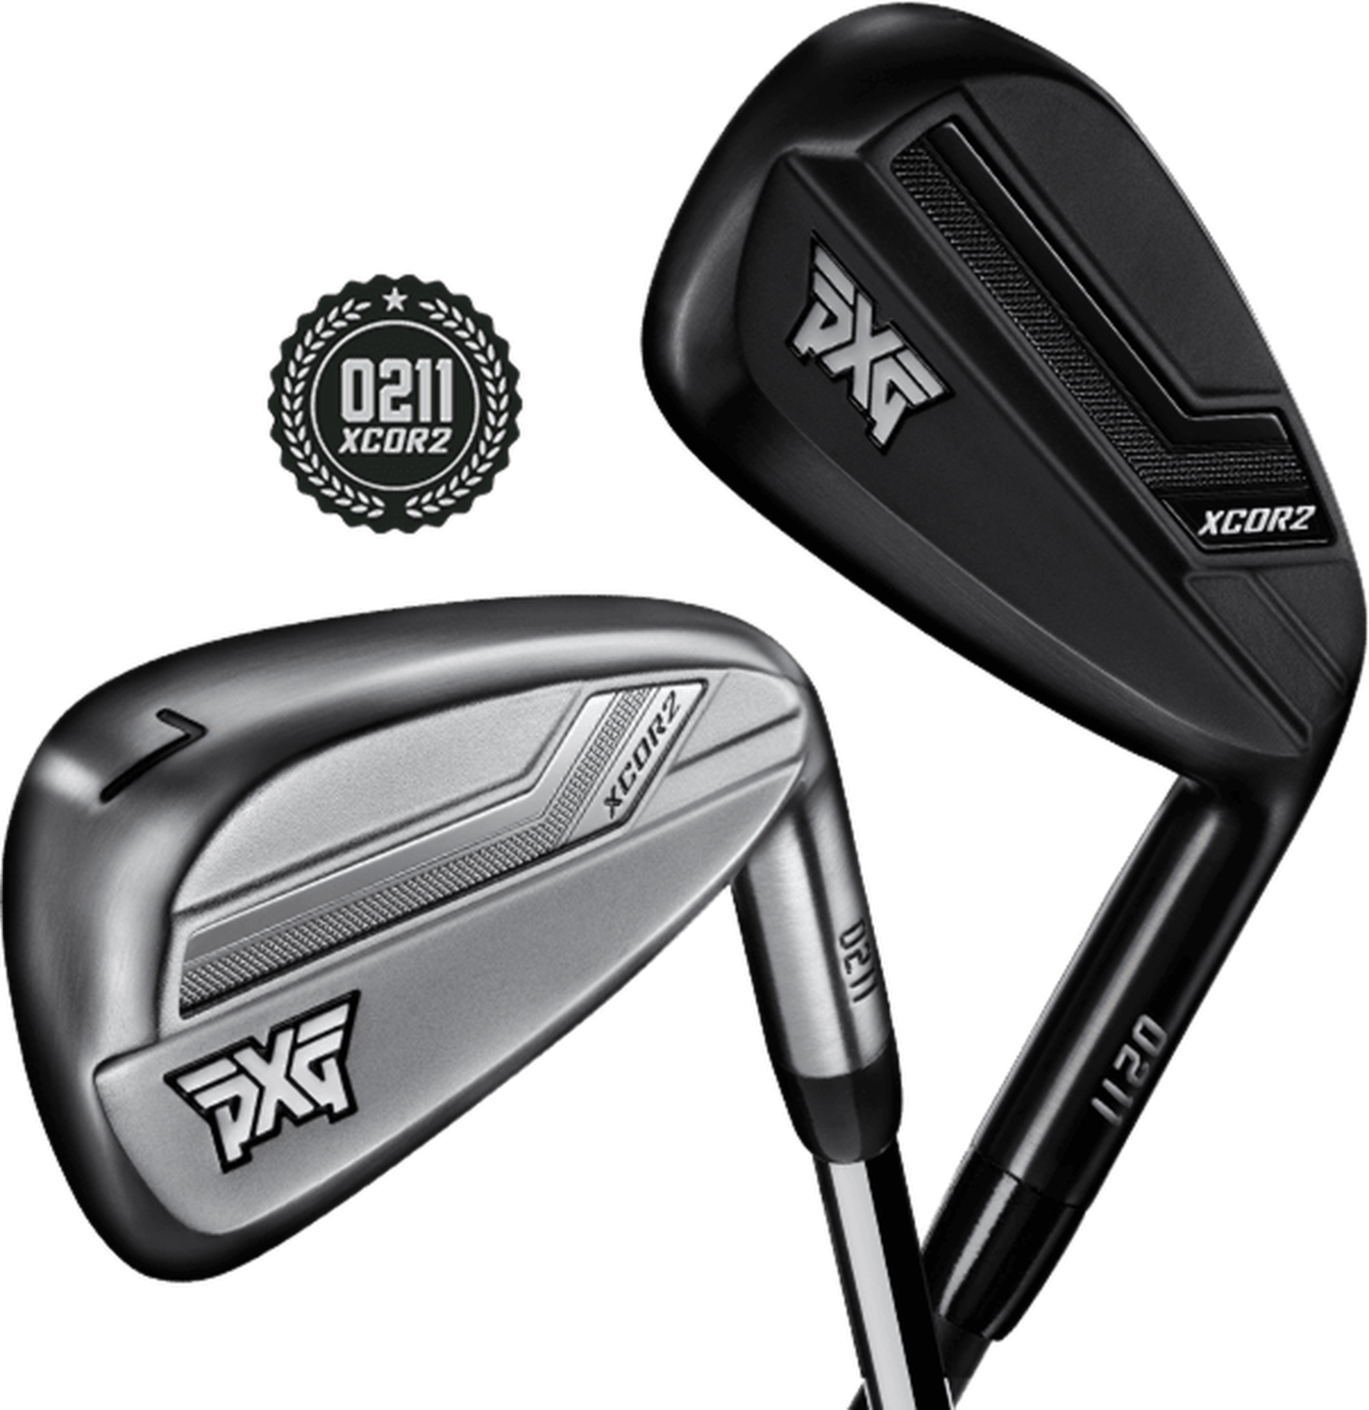 PXG 0211 アイアンセット 5.6.7.8.9.w 6本 カーボンR70-